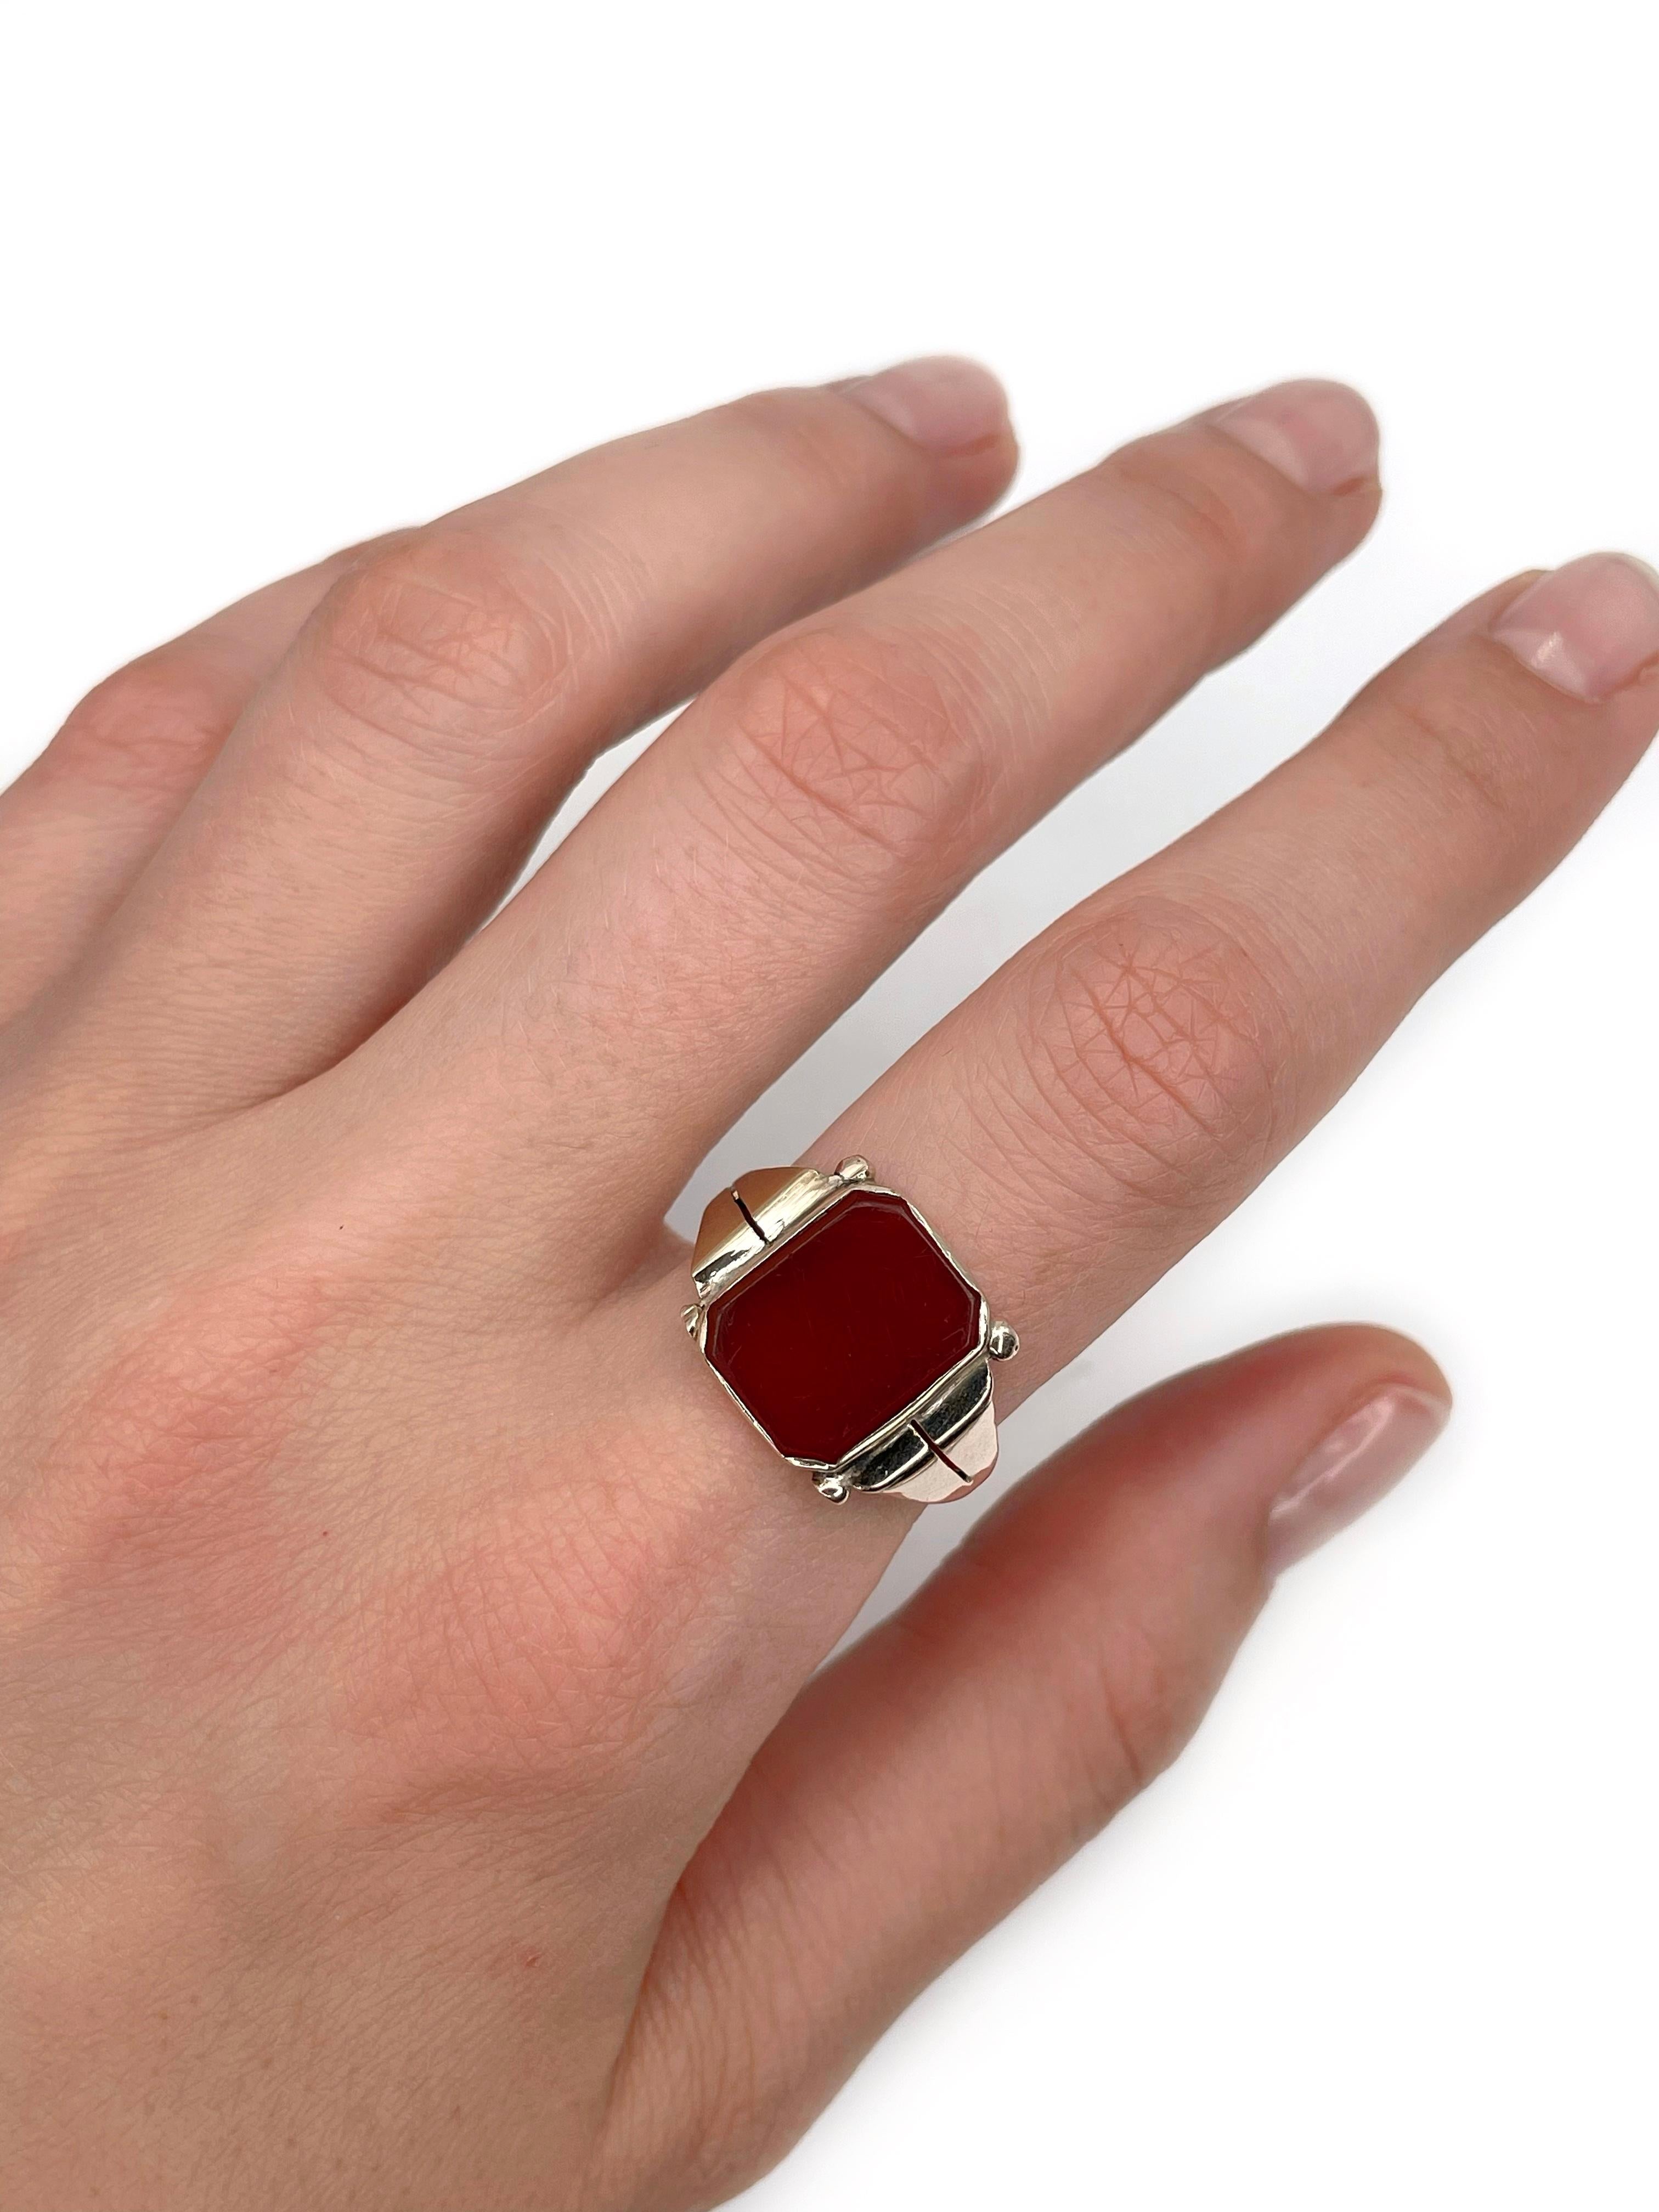 This is a vintage signet ring crafted in 9K slightly yellow gold. The piece features a rectangle carnelian. The surface has minor scratches. 

Weight: 3.61g
Size: 18.25 (US 8)

IMPORTANT: please ask about the possibility to resize before purchase.